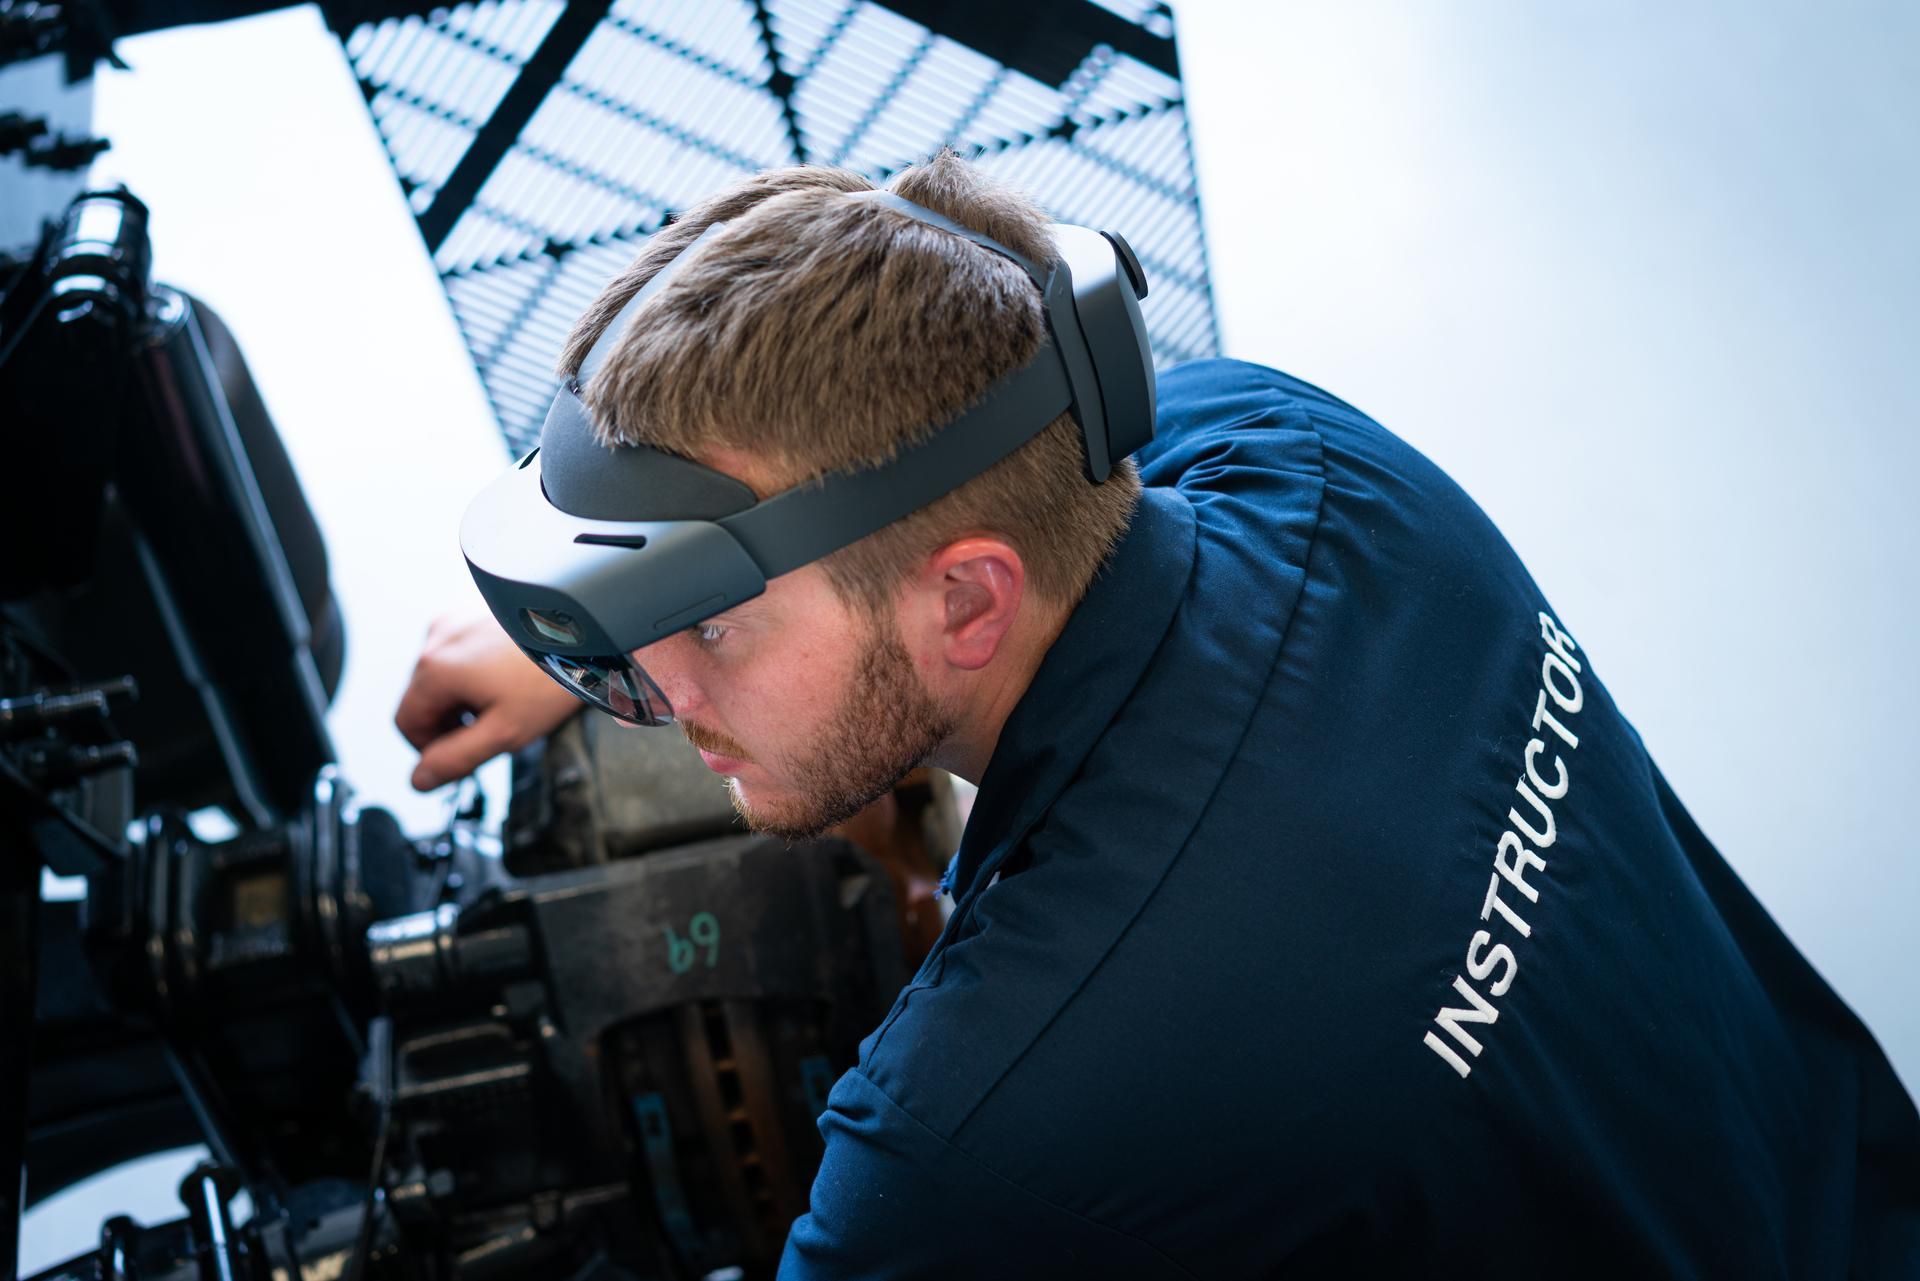 Penske instructor, wearing a blue uniform with the word instructor across the back in all caps, crouched down looking at a diesel truck engine. He is wearing mixed reality HoloLens Goggles for training purposes.